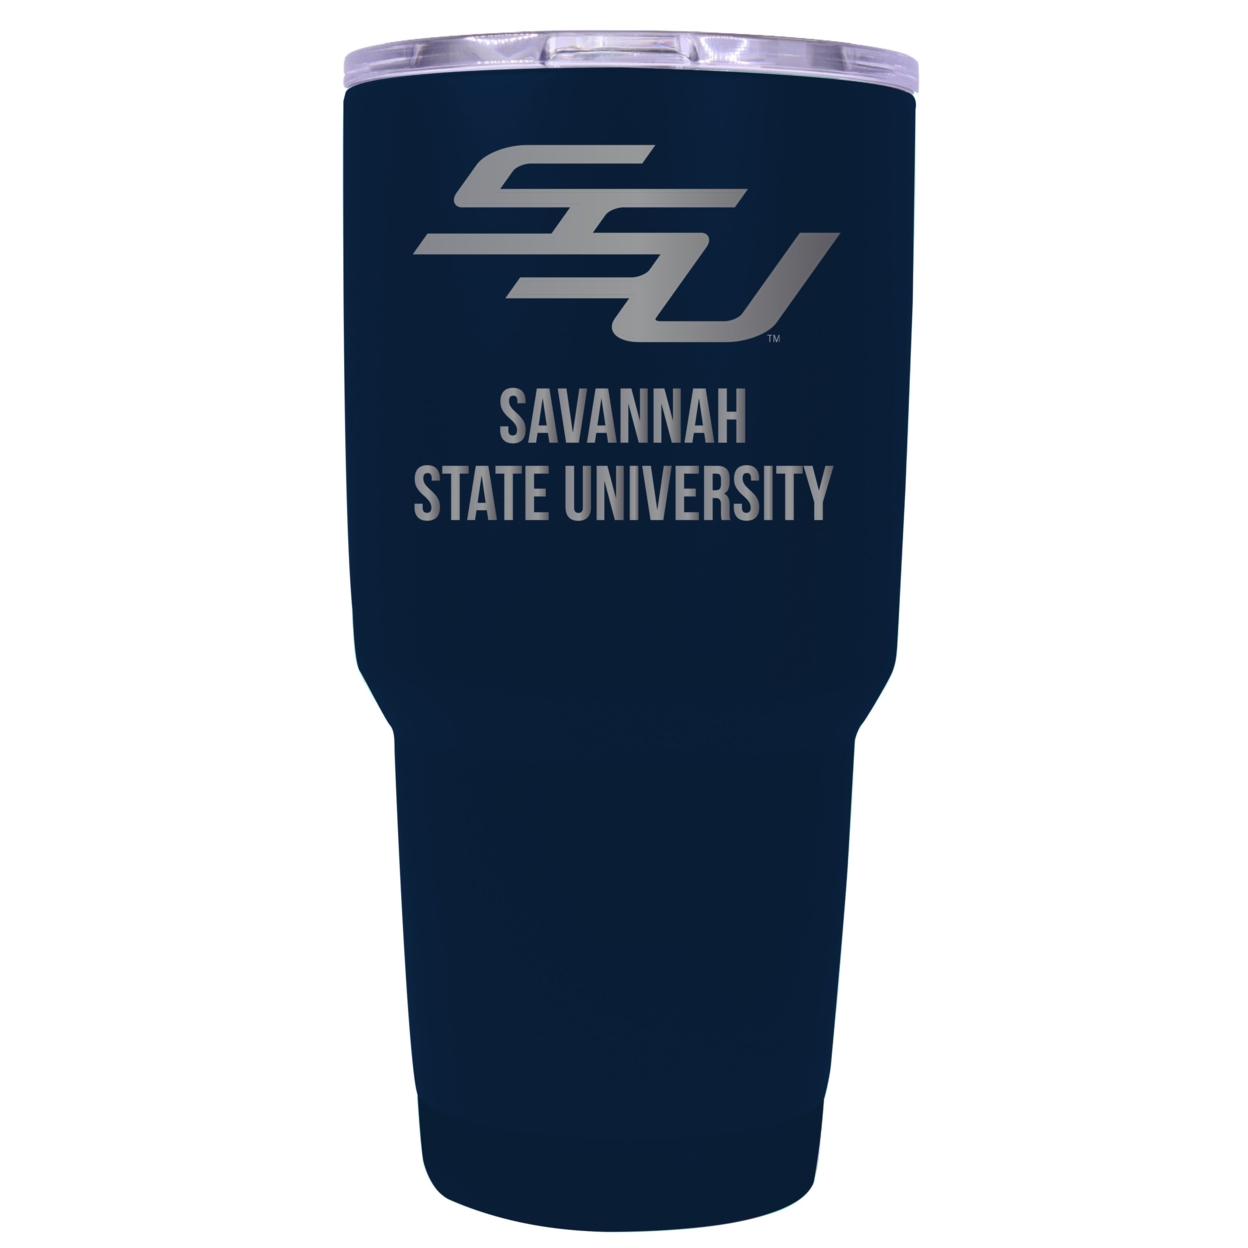 Savannah State University 24 Oz Laser Engraved Stainless Steel Insulated Tumbler - Choose Your Color. - Red